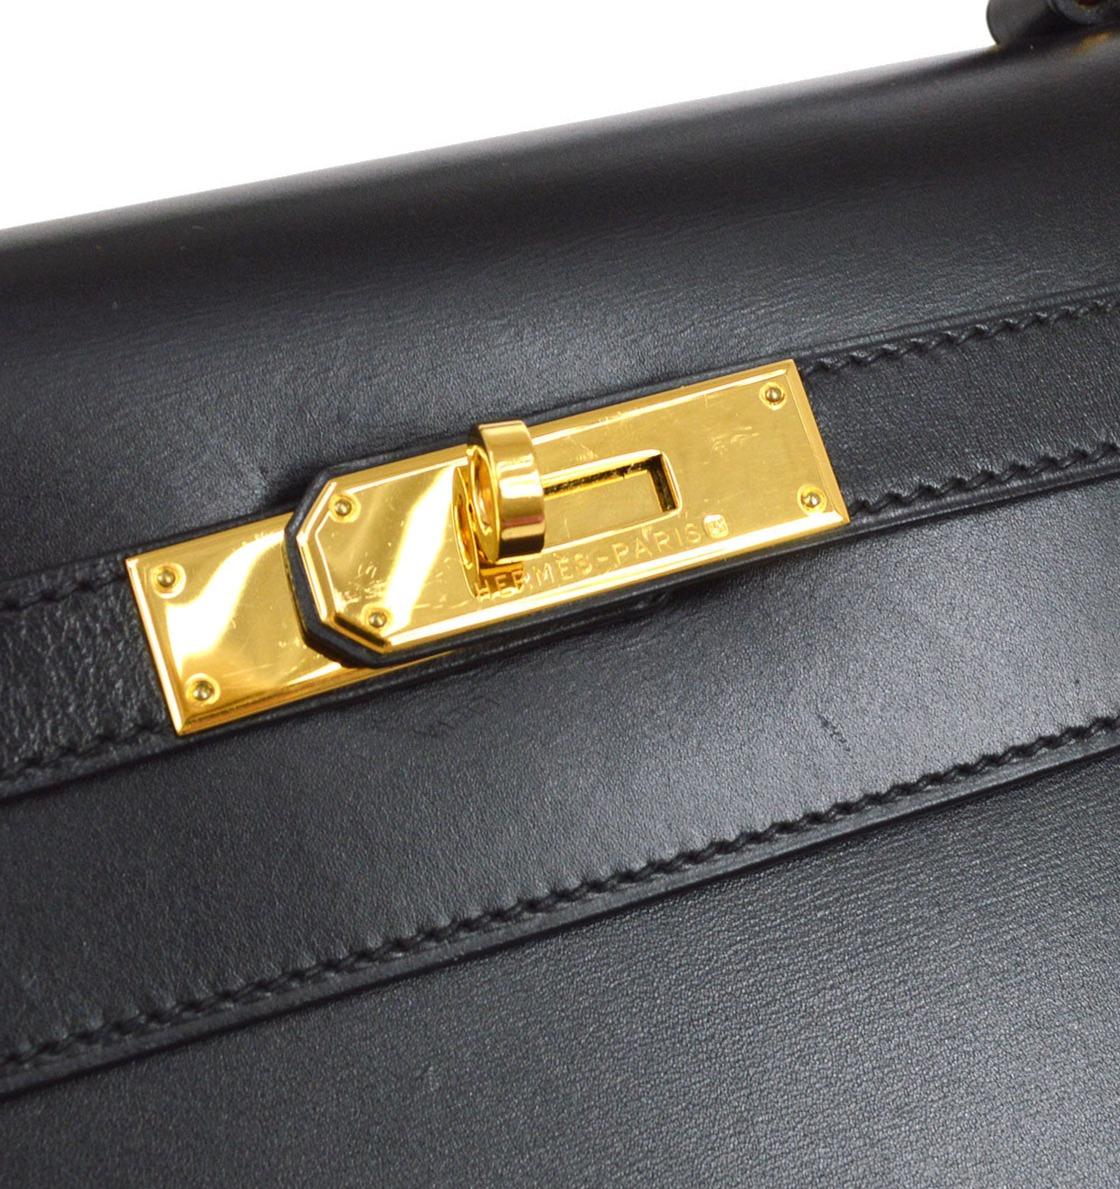 Pre-Owned Vintage Condition
From 2002 Collection
Box Calfskin Leather 
Gold Hardware
Measures 12.5